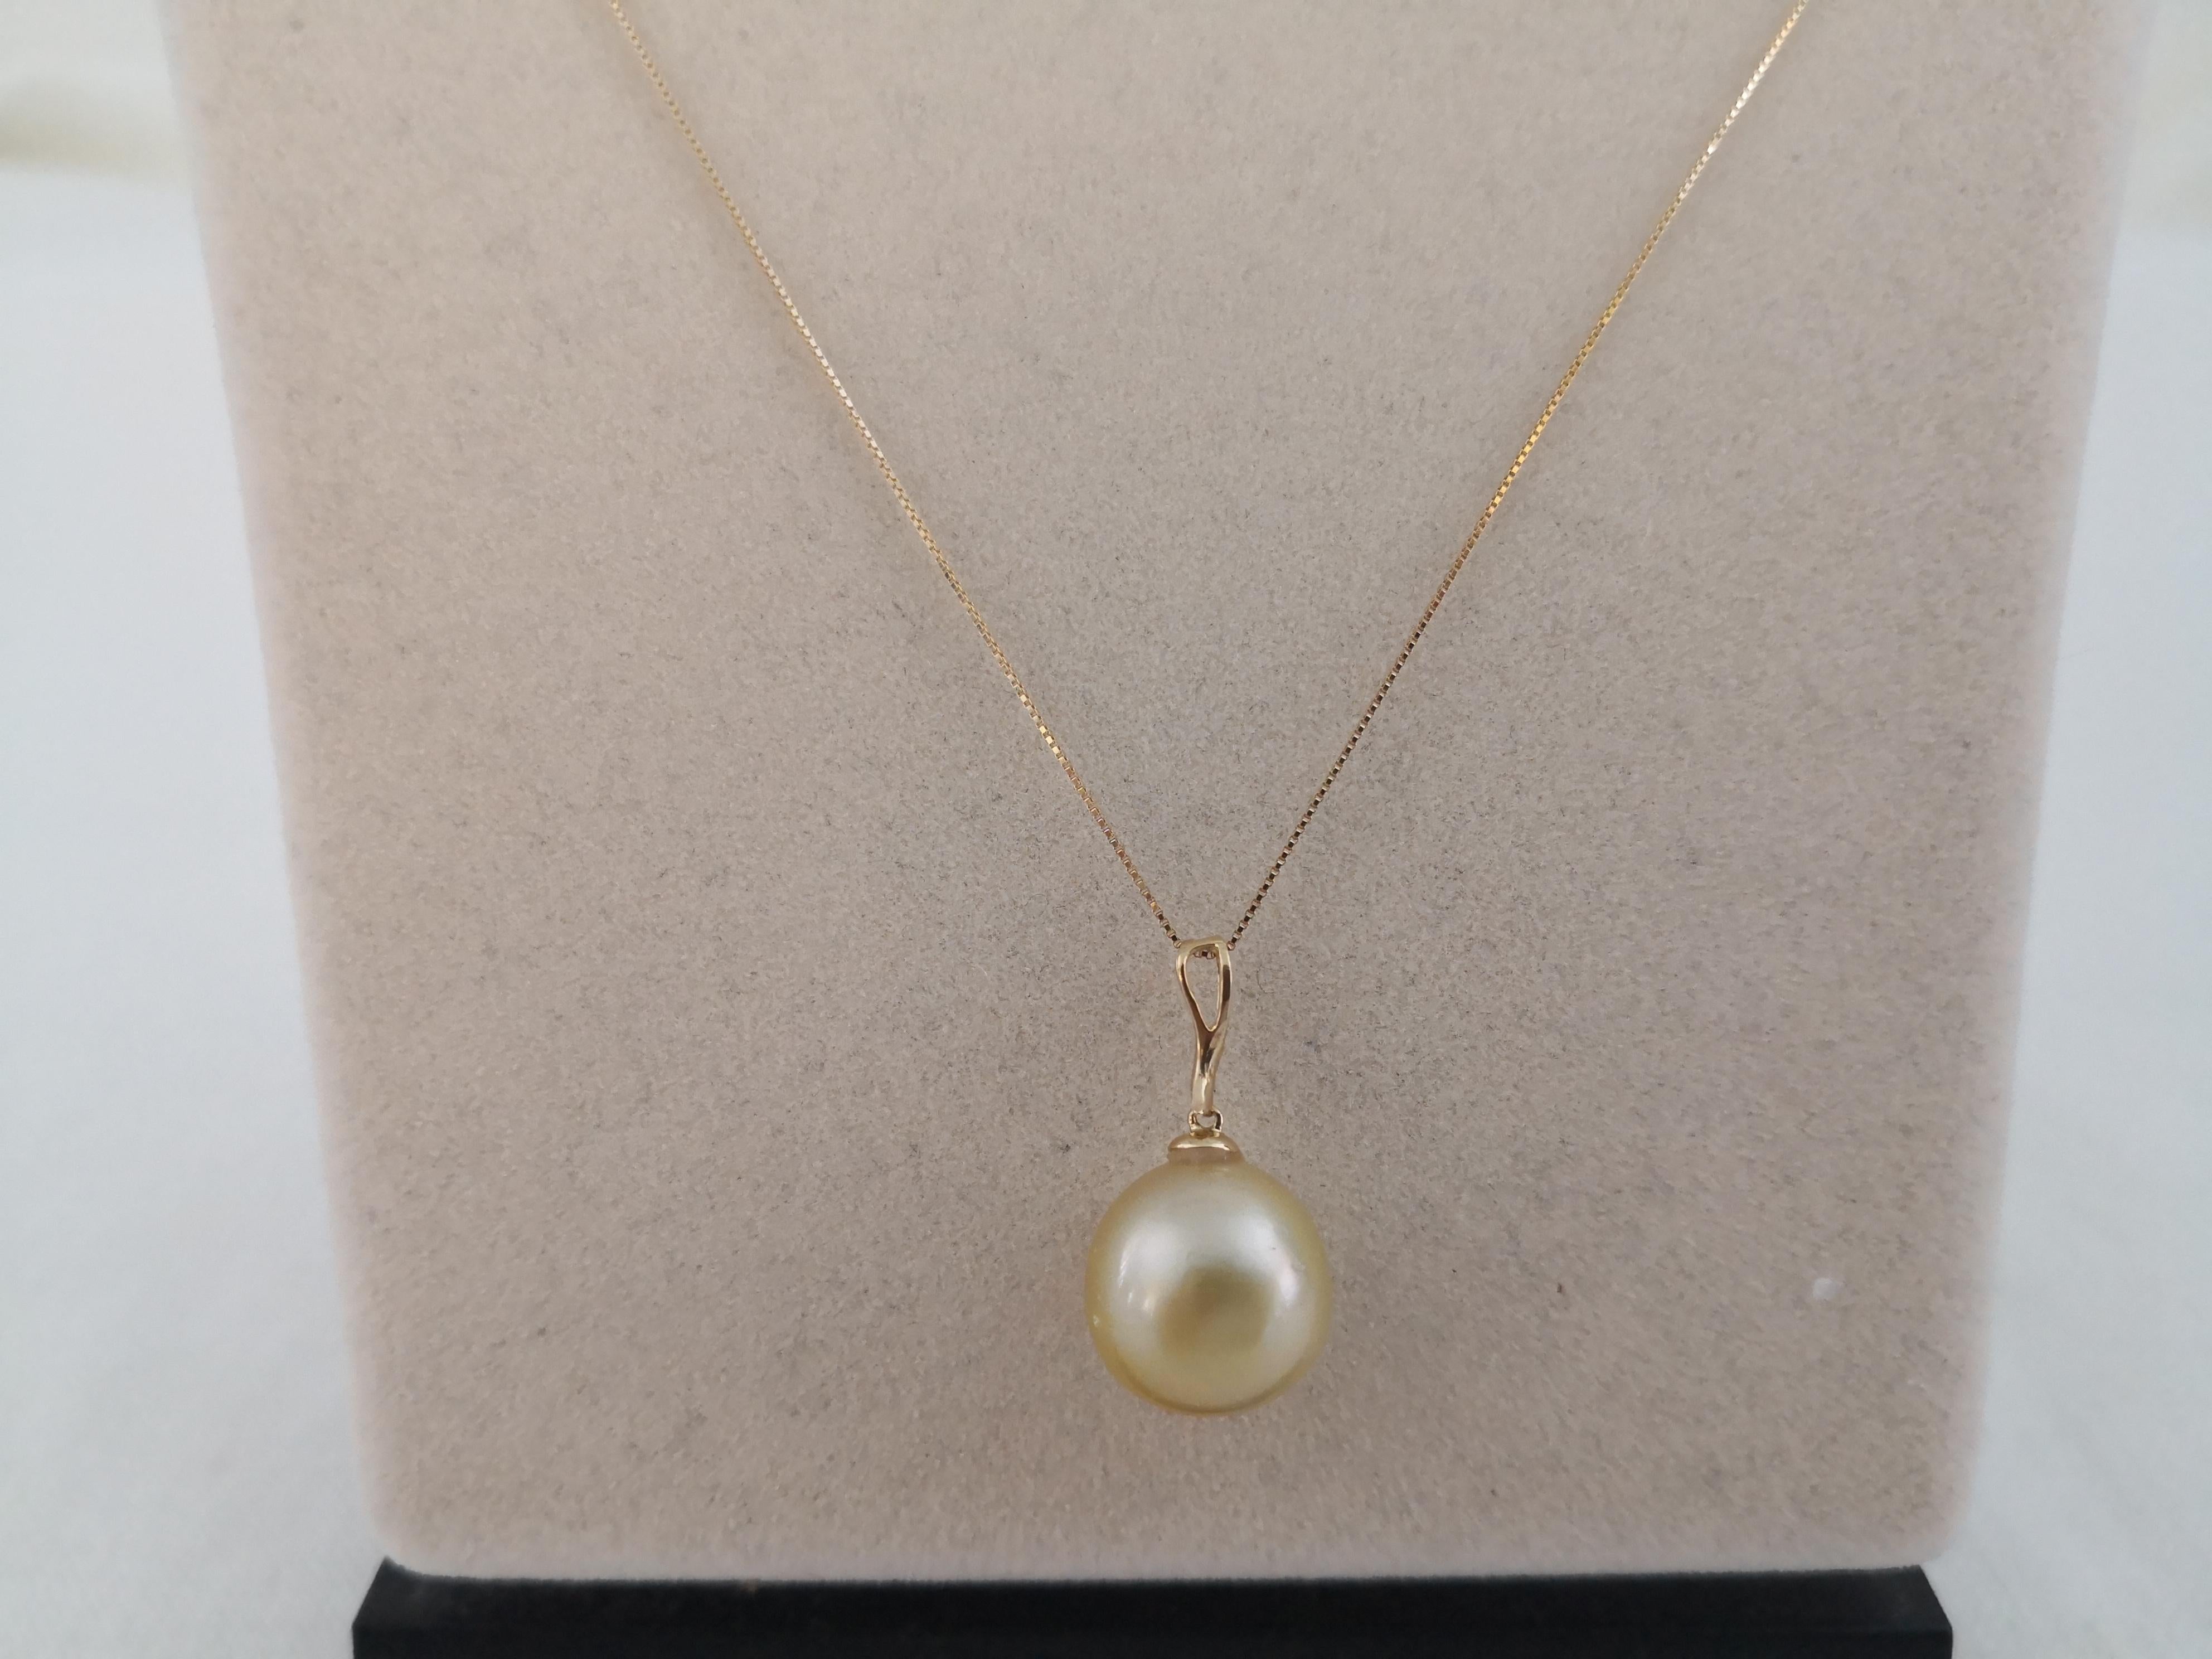 Natural Color South Sea Pearl Pendant

- Origin:  Indonesia ocean waters

- Produced by Pinctada Maxima Oyster

- 18  karat White Gold mounting 

- 45 cm long chain manufactured in 18 karats Yellow gold

- Total weight of 6.90  grams

- Size of